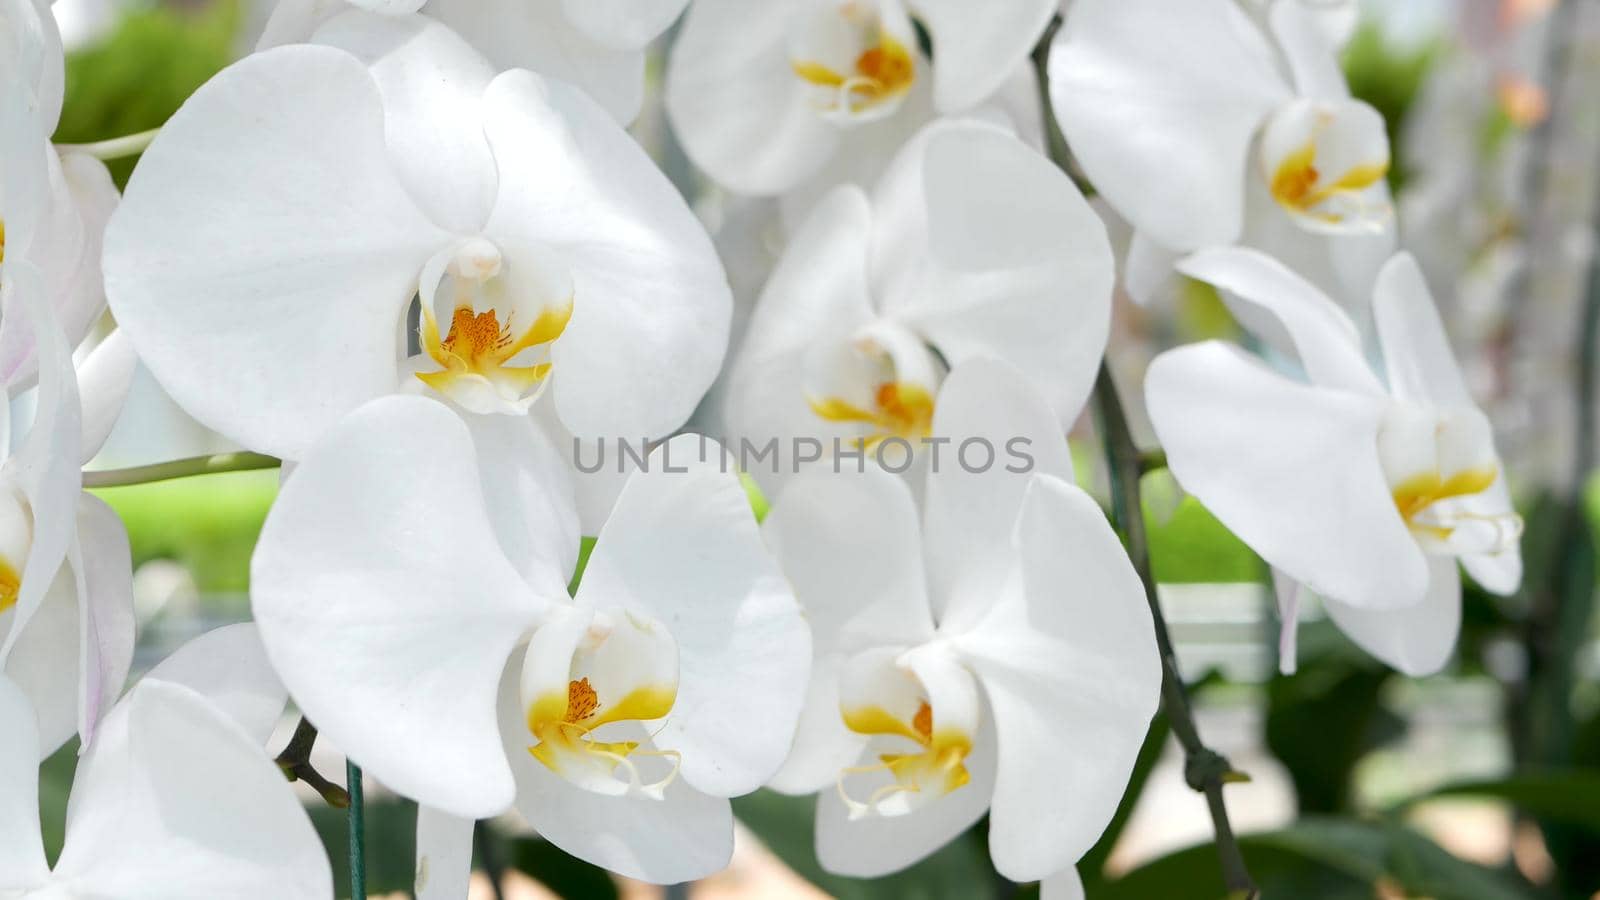 Delicate white elegant orchid flowers with yellow centers in sunlight. Close up macro of tropical petals in spring garden. Abstract natural exotic background with copy space. Floral blossom pattern